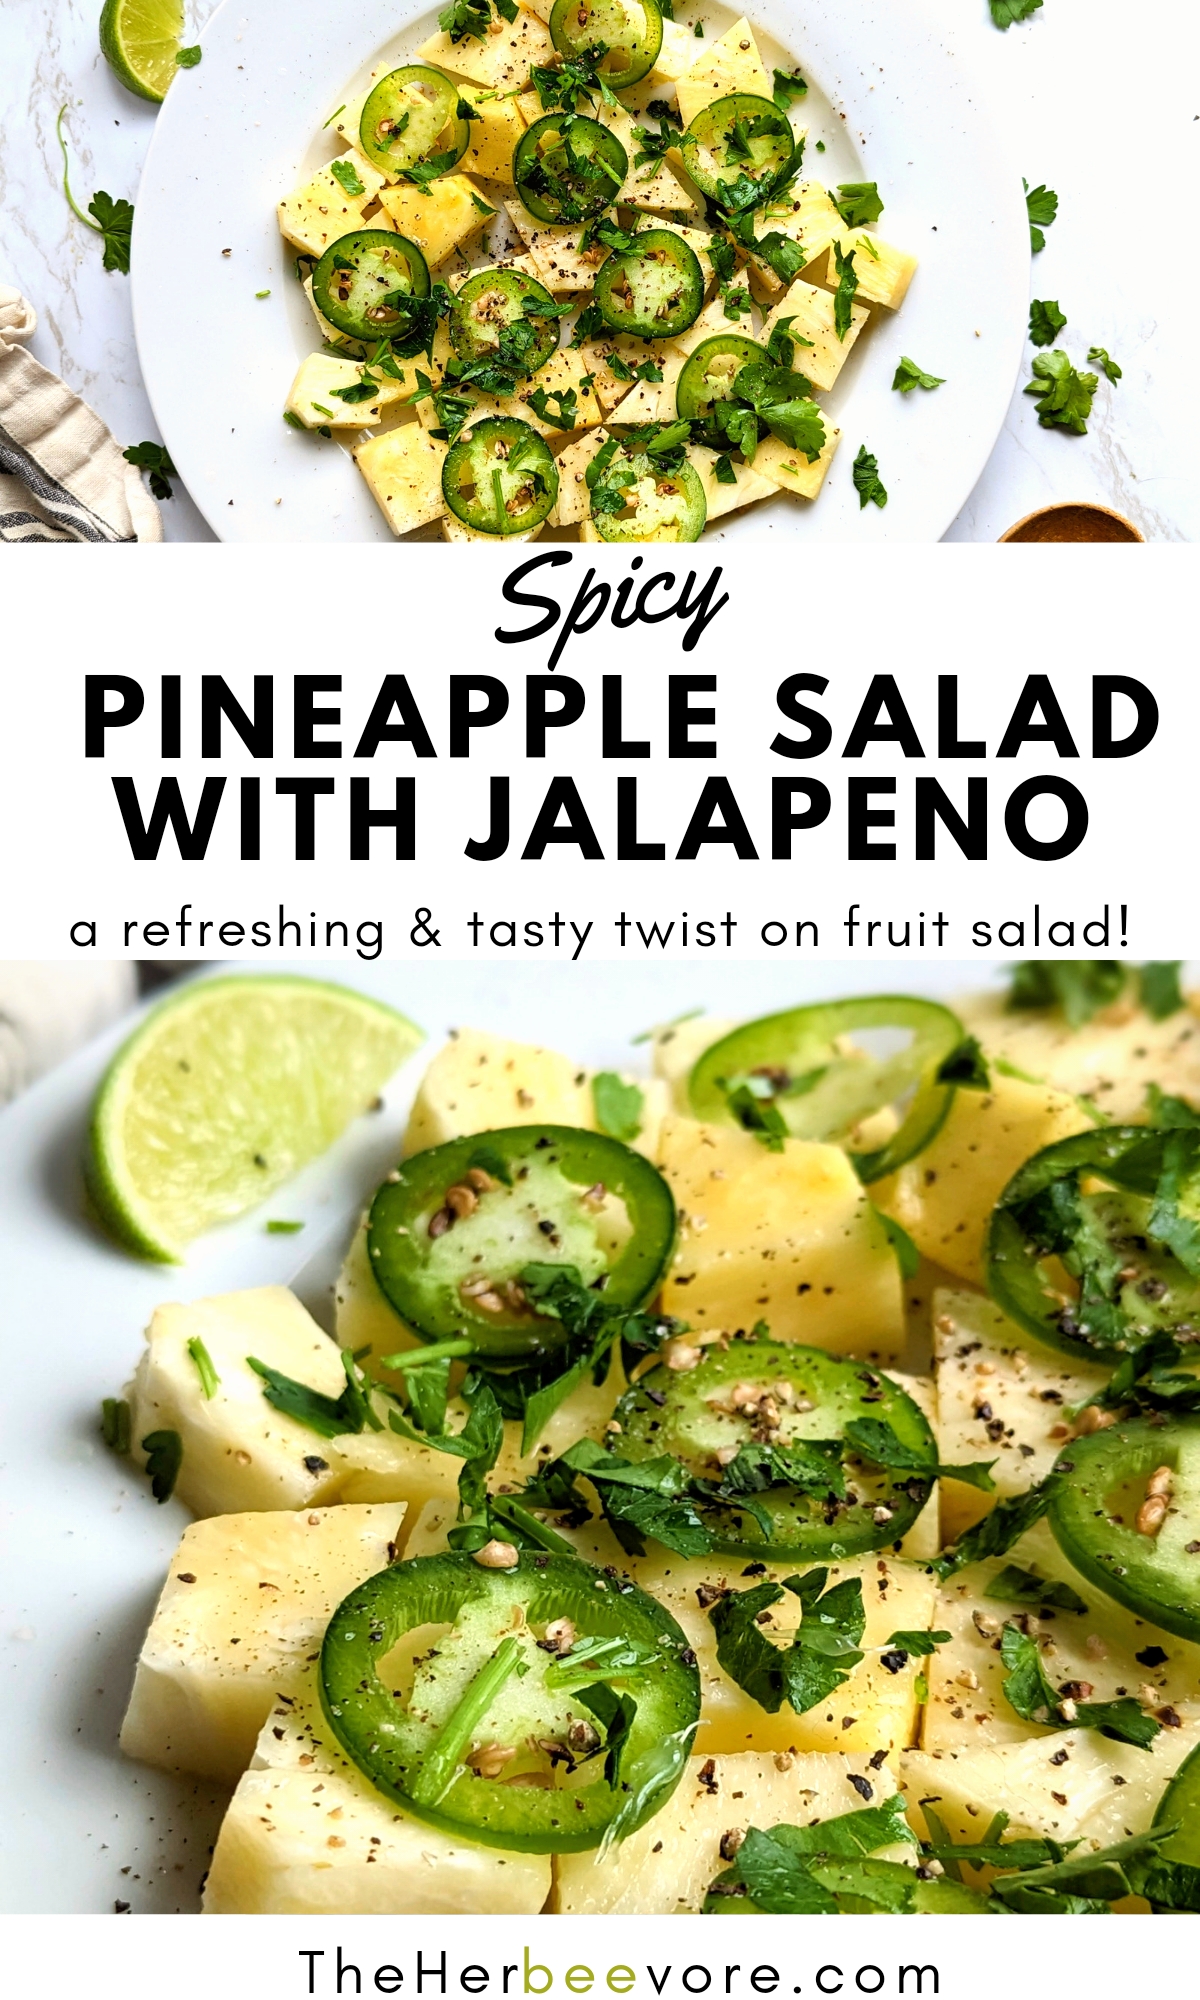 spicy pineapple salad with jalapeno and lime juice spicy fruit salad recipes with peppers healthy pineapple salad not sweet